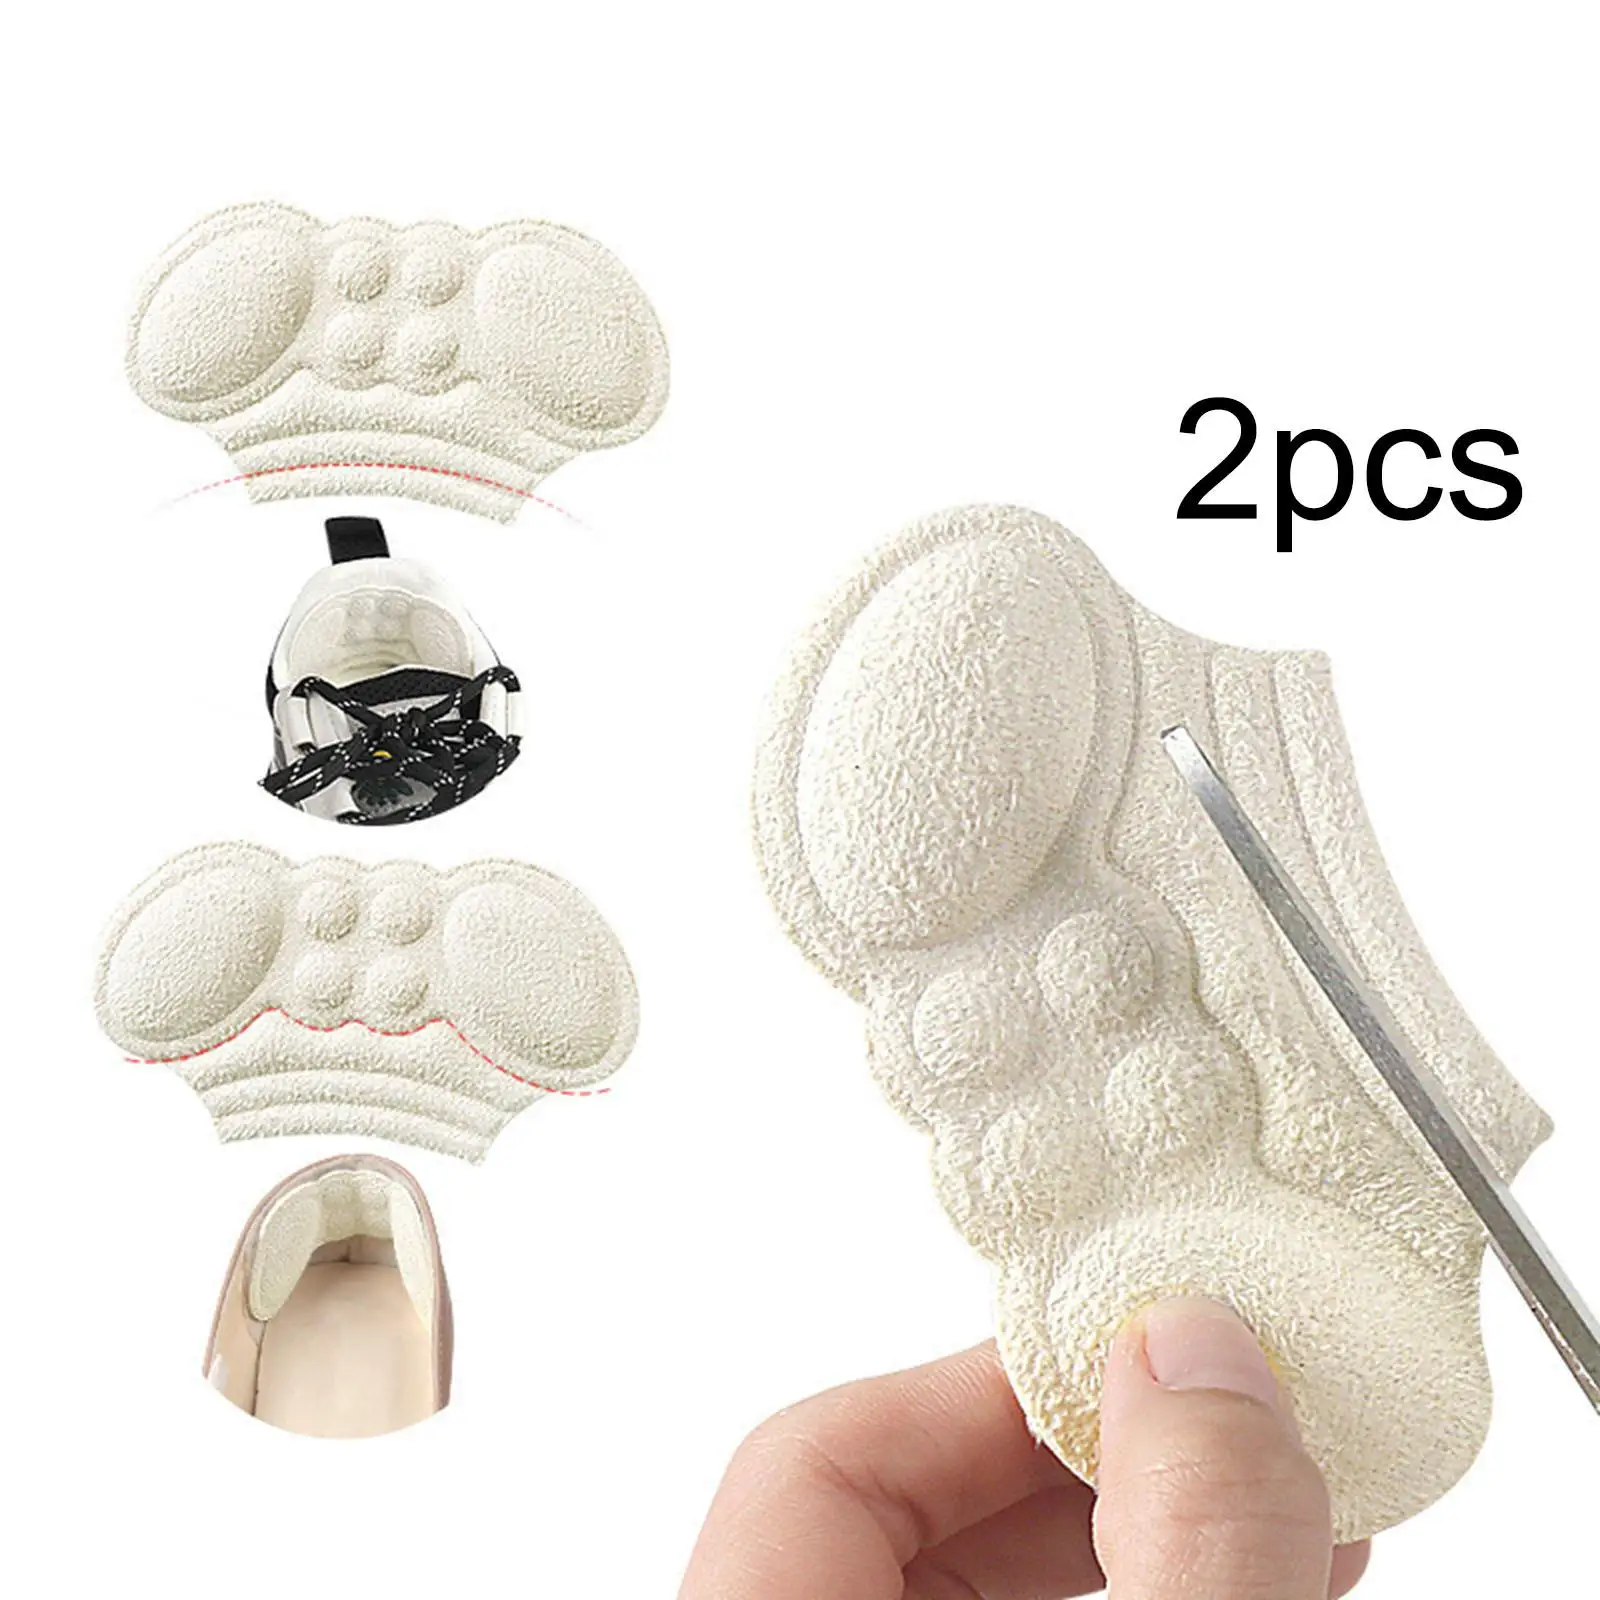 Foot Grips heel Pads Liner Cushions Self-adhesive for Loose Shoes Extra Thick